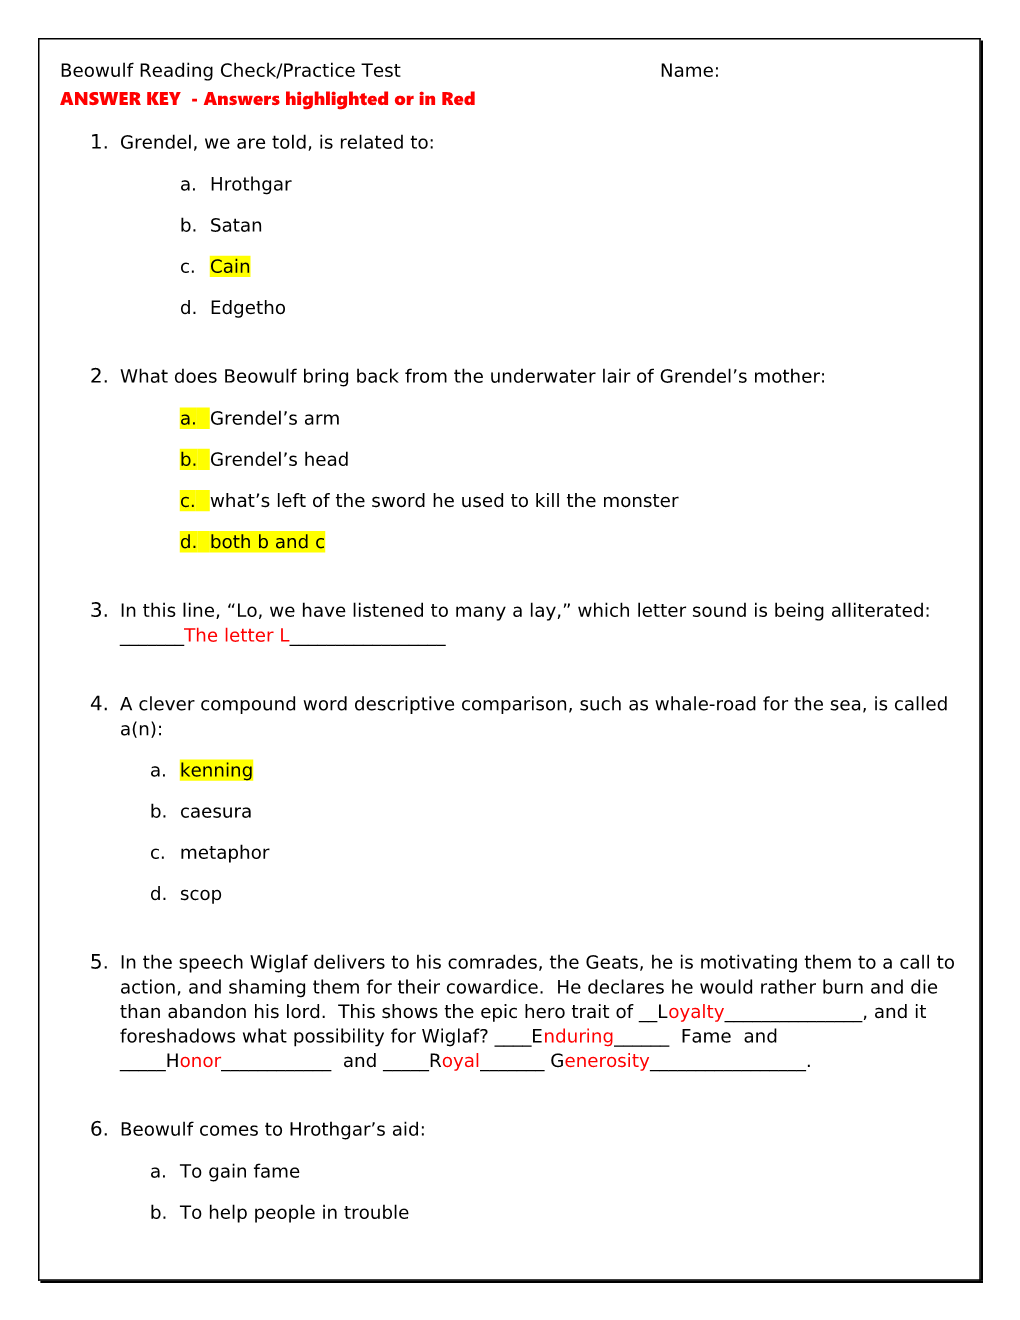 Beowulf Reading Check/Practice Testname: ANSWER KEY - Answers Highlighted Or in Red